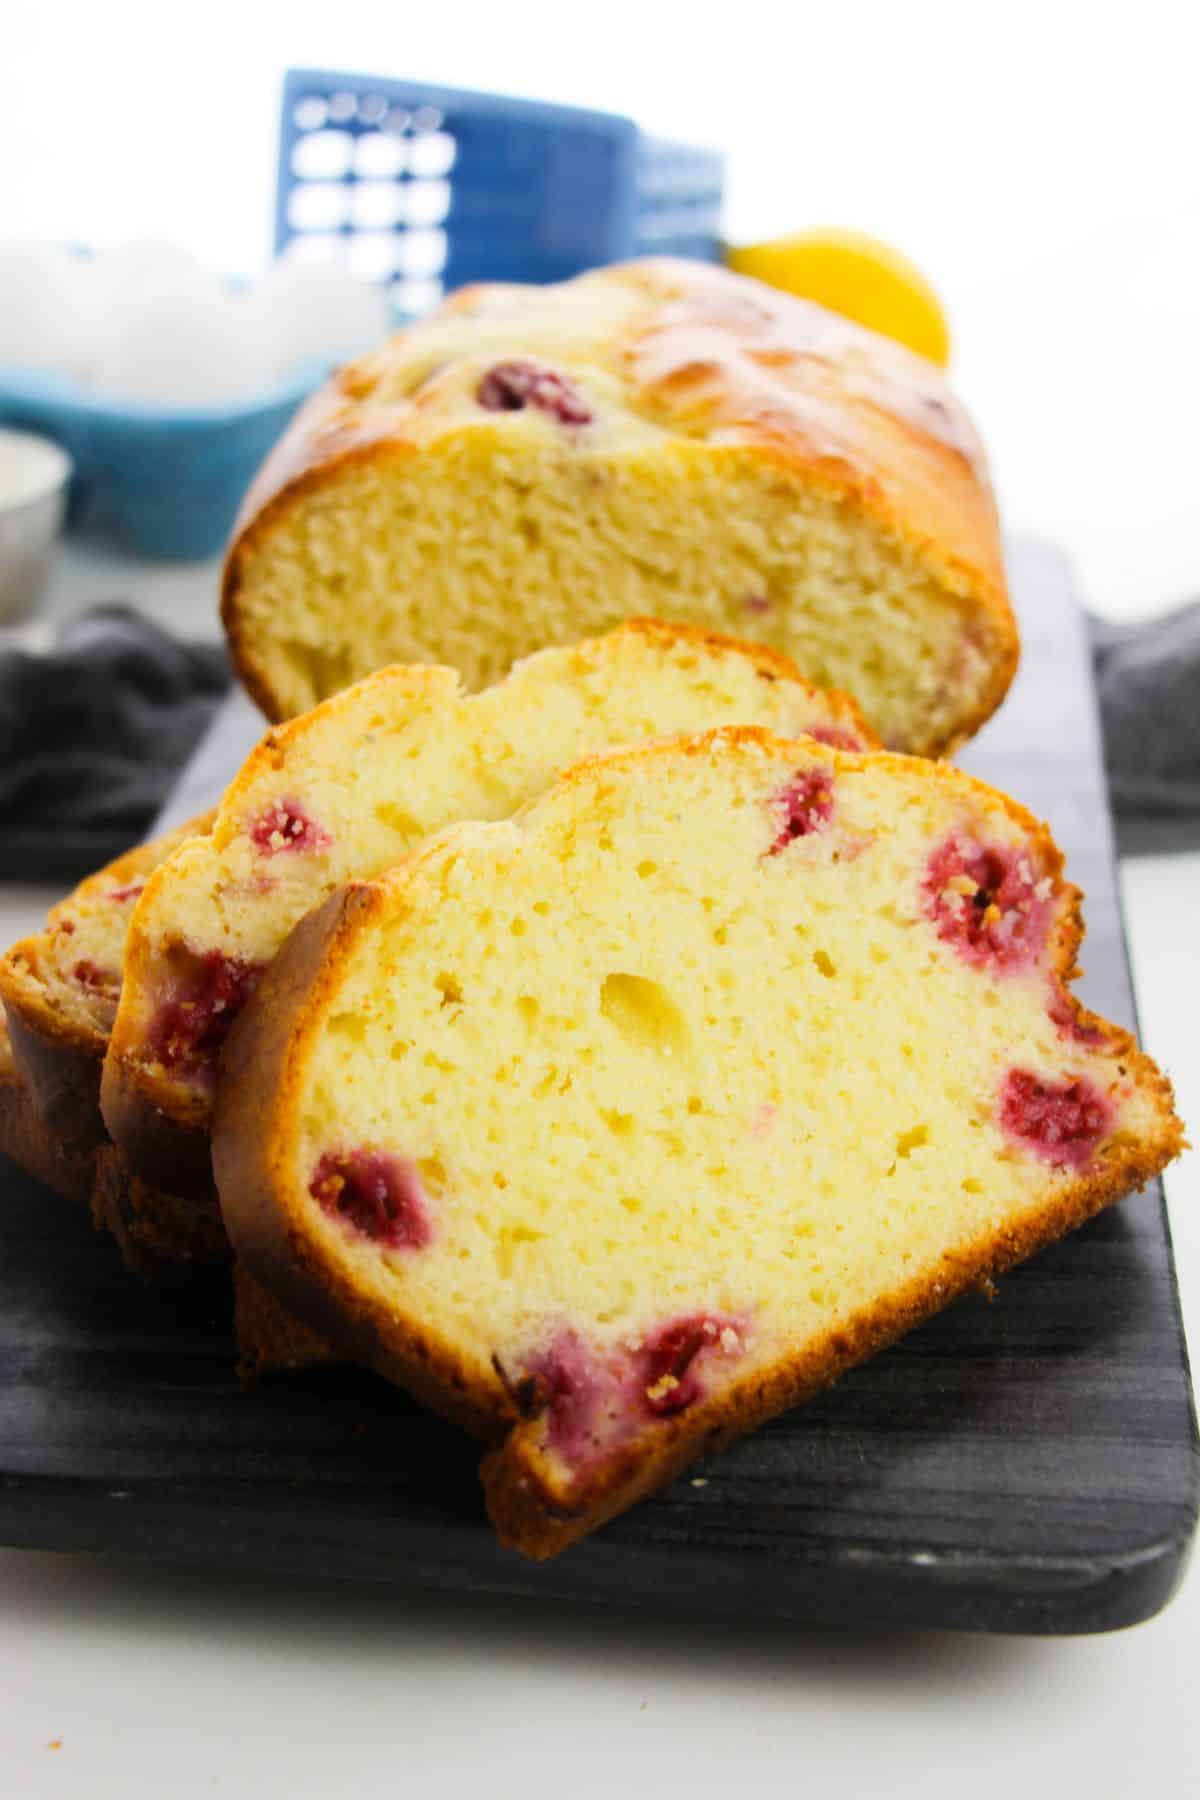 sliced Lemon Raspberry Loaf on a wooden plate with flour, lemon, and egg on the side